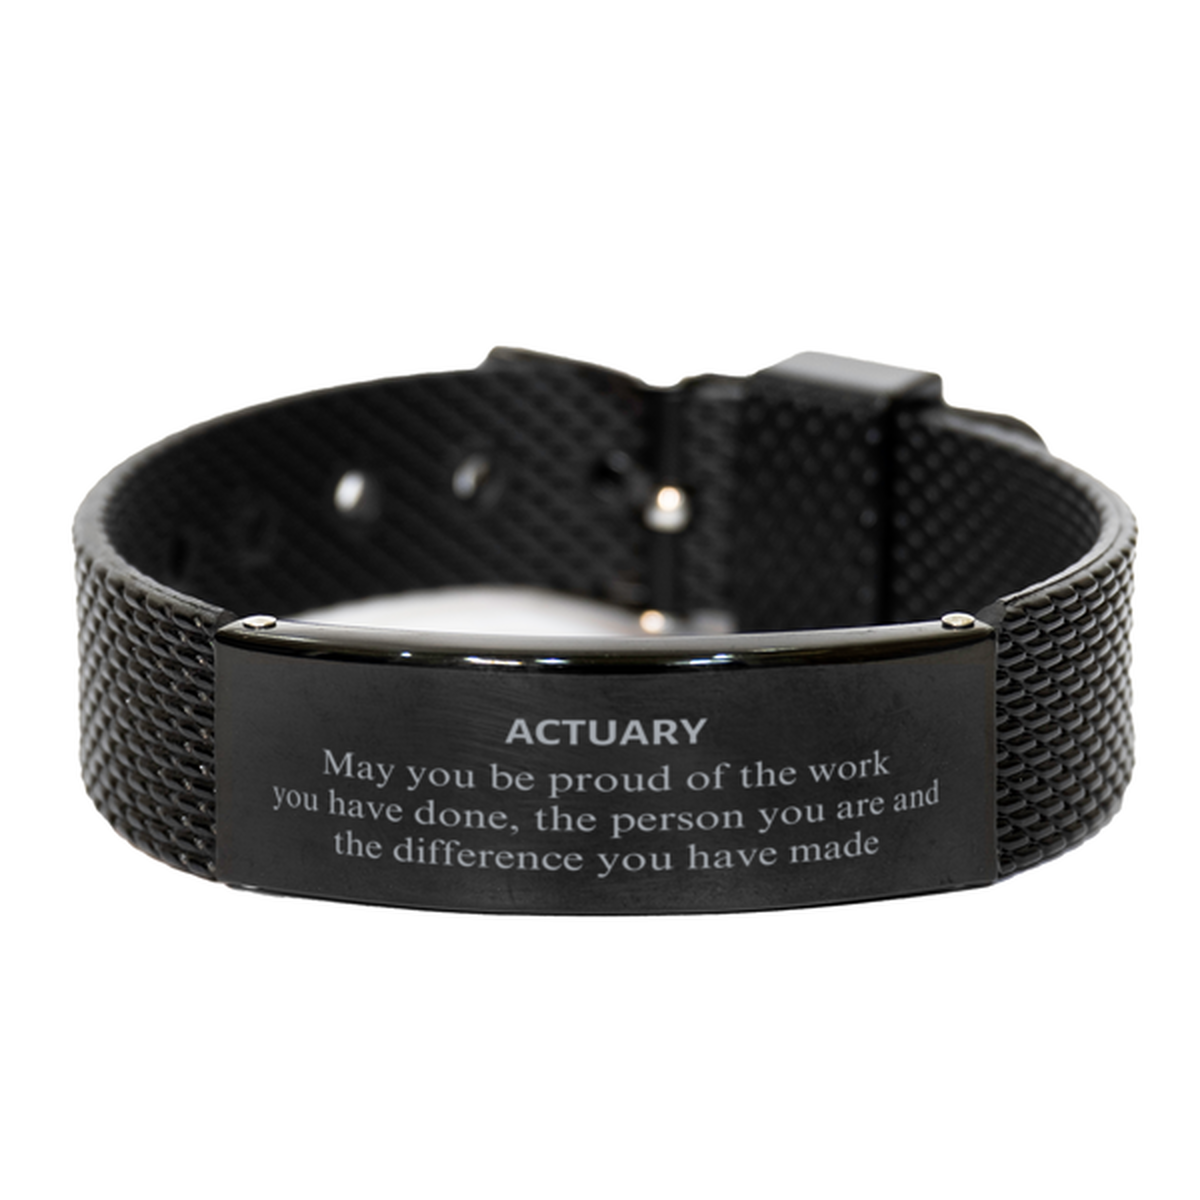 Actuary May you be proud of the work you have done, Retirement Actuary Black Shark Mesh Bracelet for Colleague Appreciation Gifts Amazing for Actuary